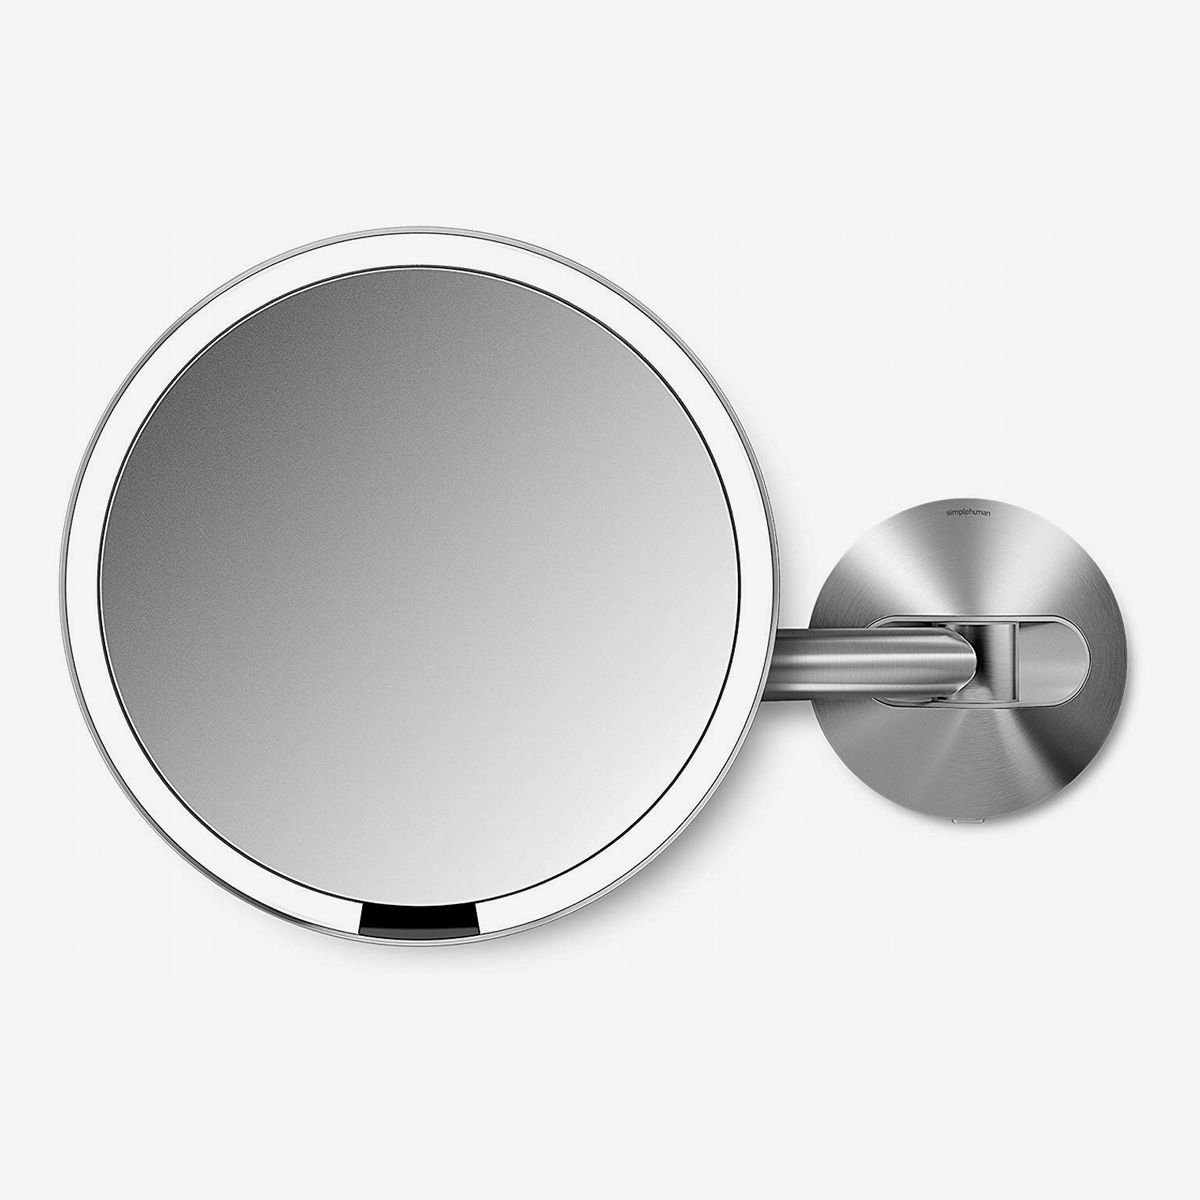 14 Best Lighted Makeup Mirrors 2021, Best Wall Mounted Lighted Make Up Mirror